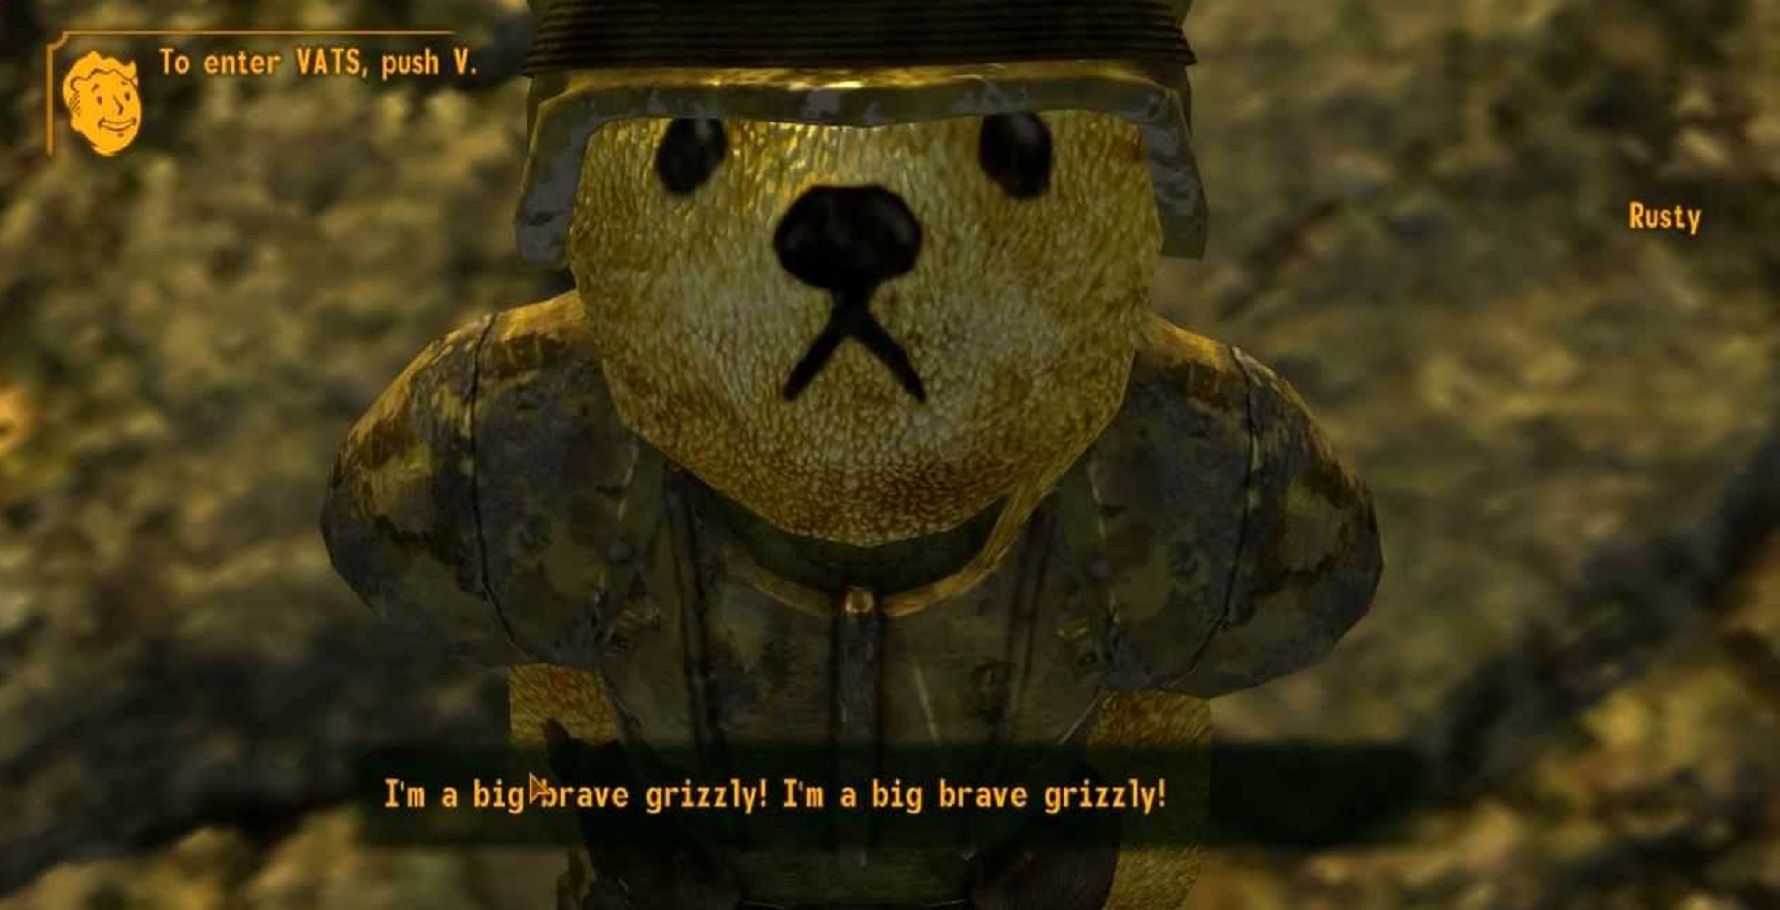 18 Surprising Perks You Didn't Know Existed in Fallout New Vegas 